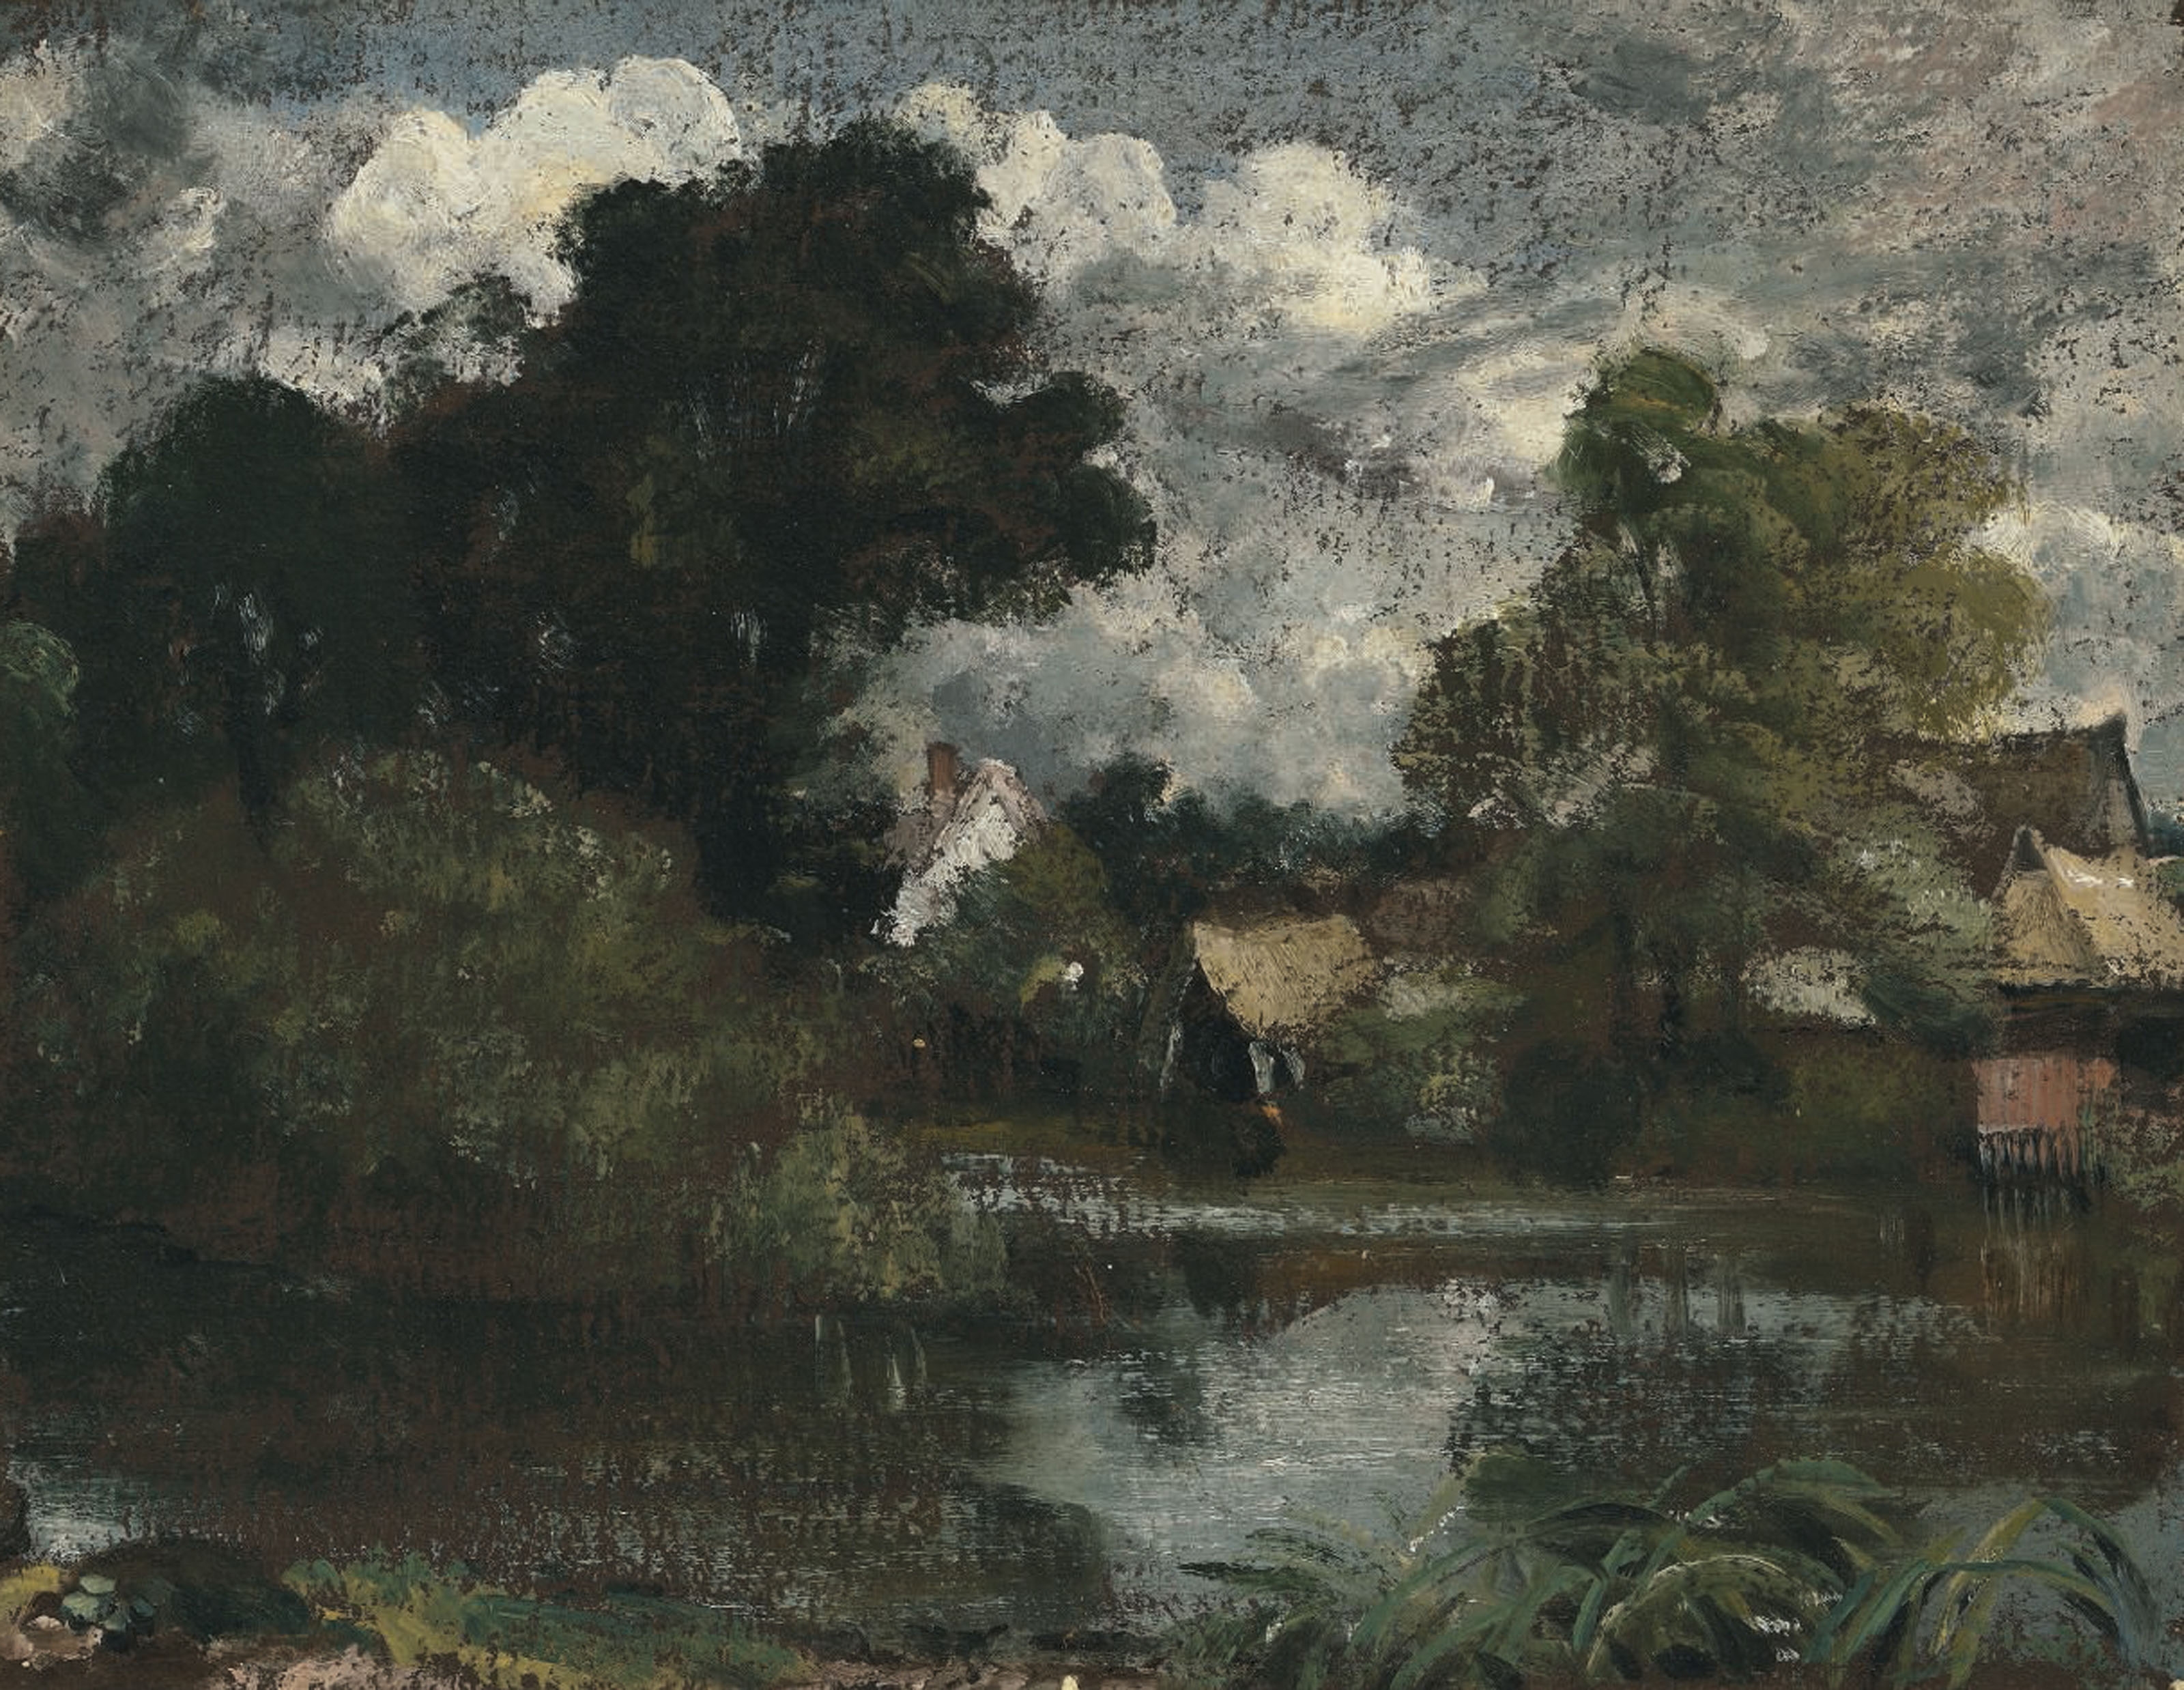 A study for The White Horse by John Constable